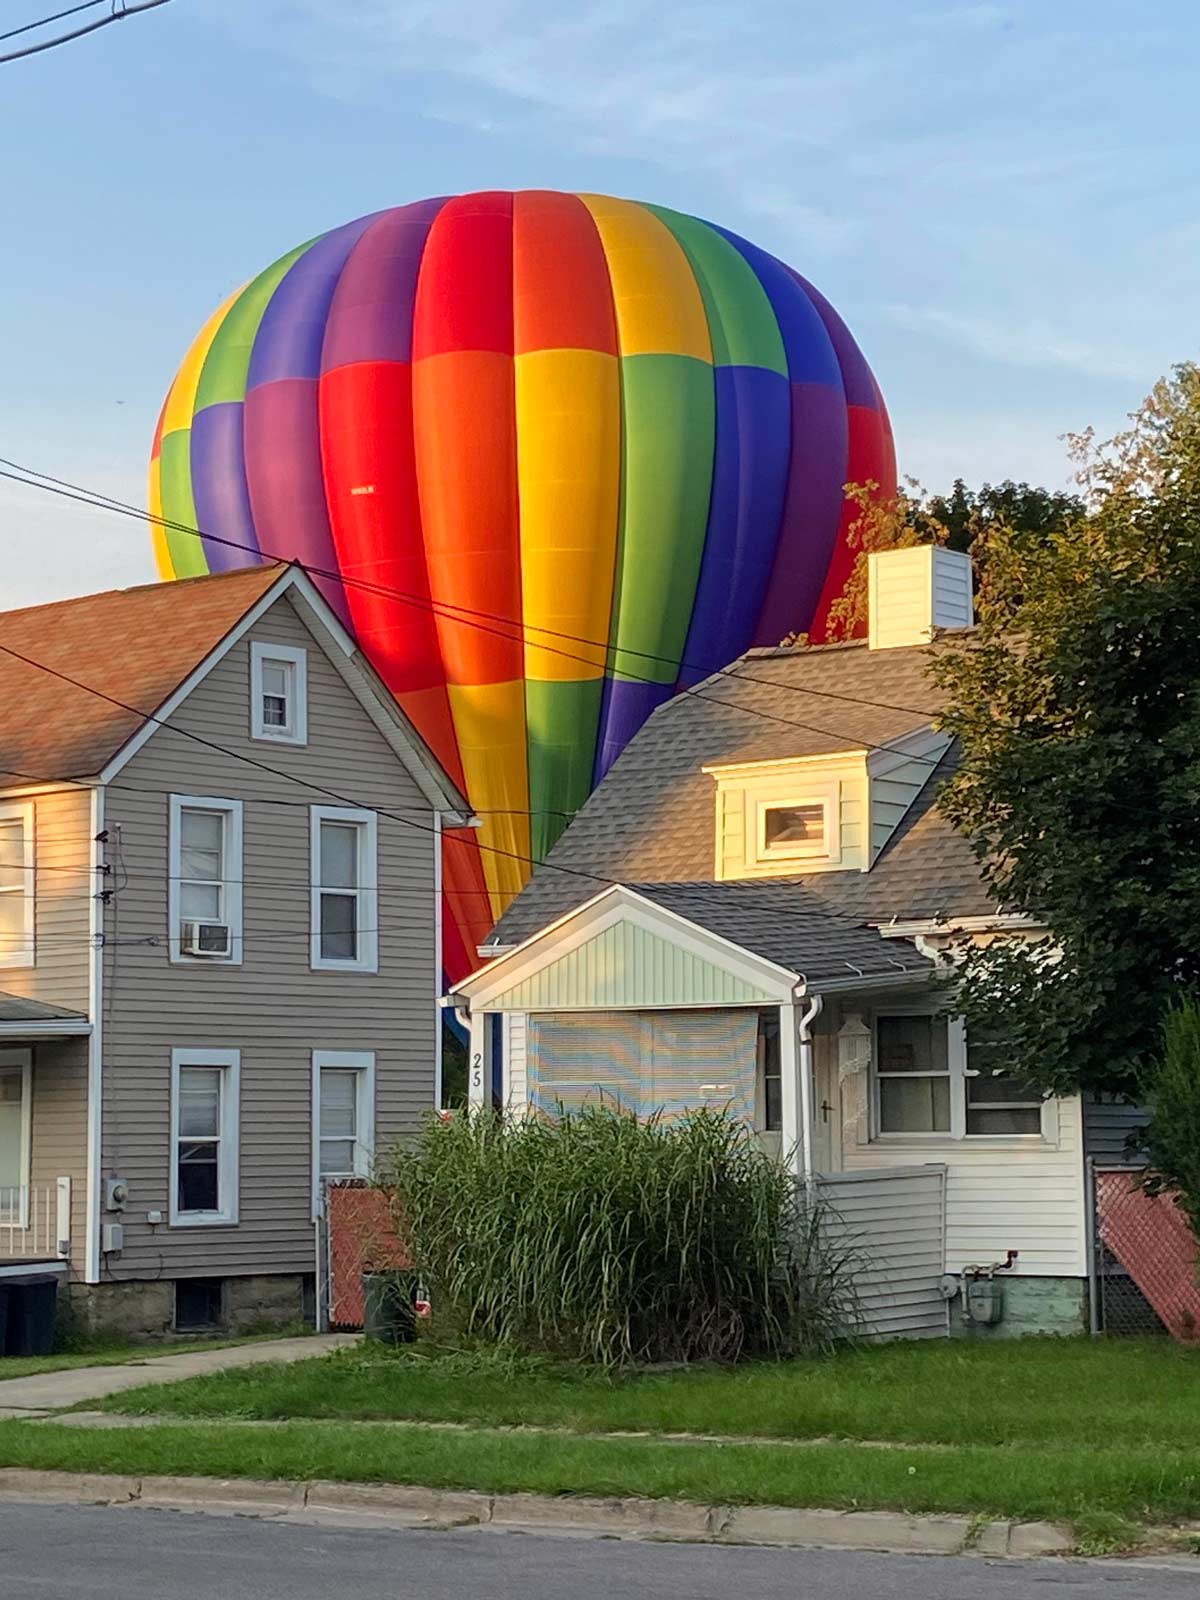 A hot air balloon landed in my backyard while I was out. The neighbor snapped this pic